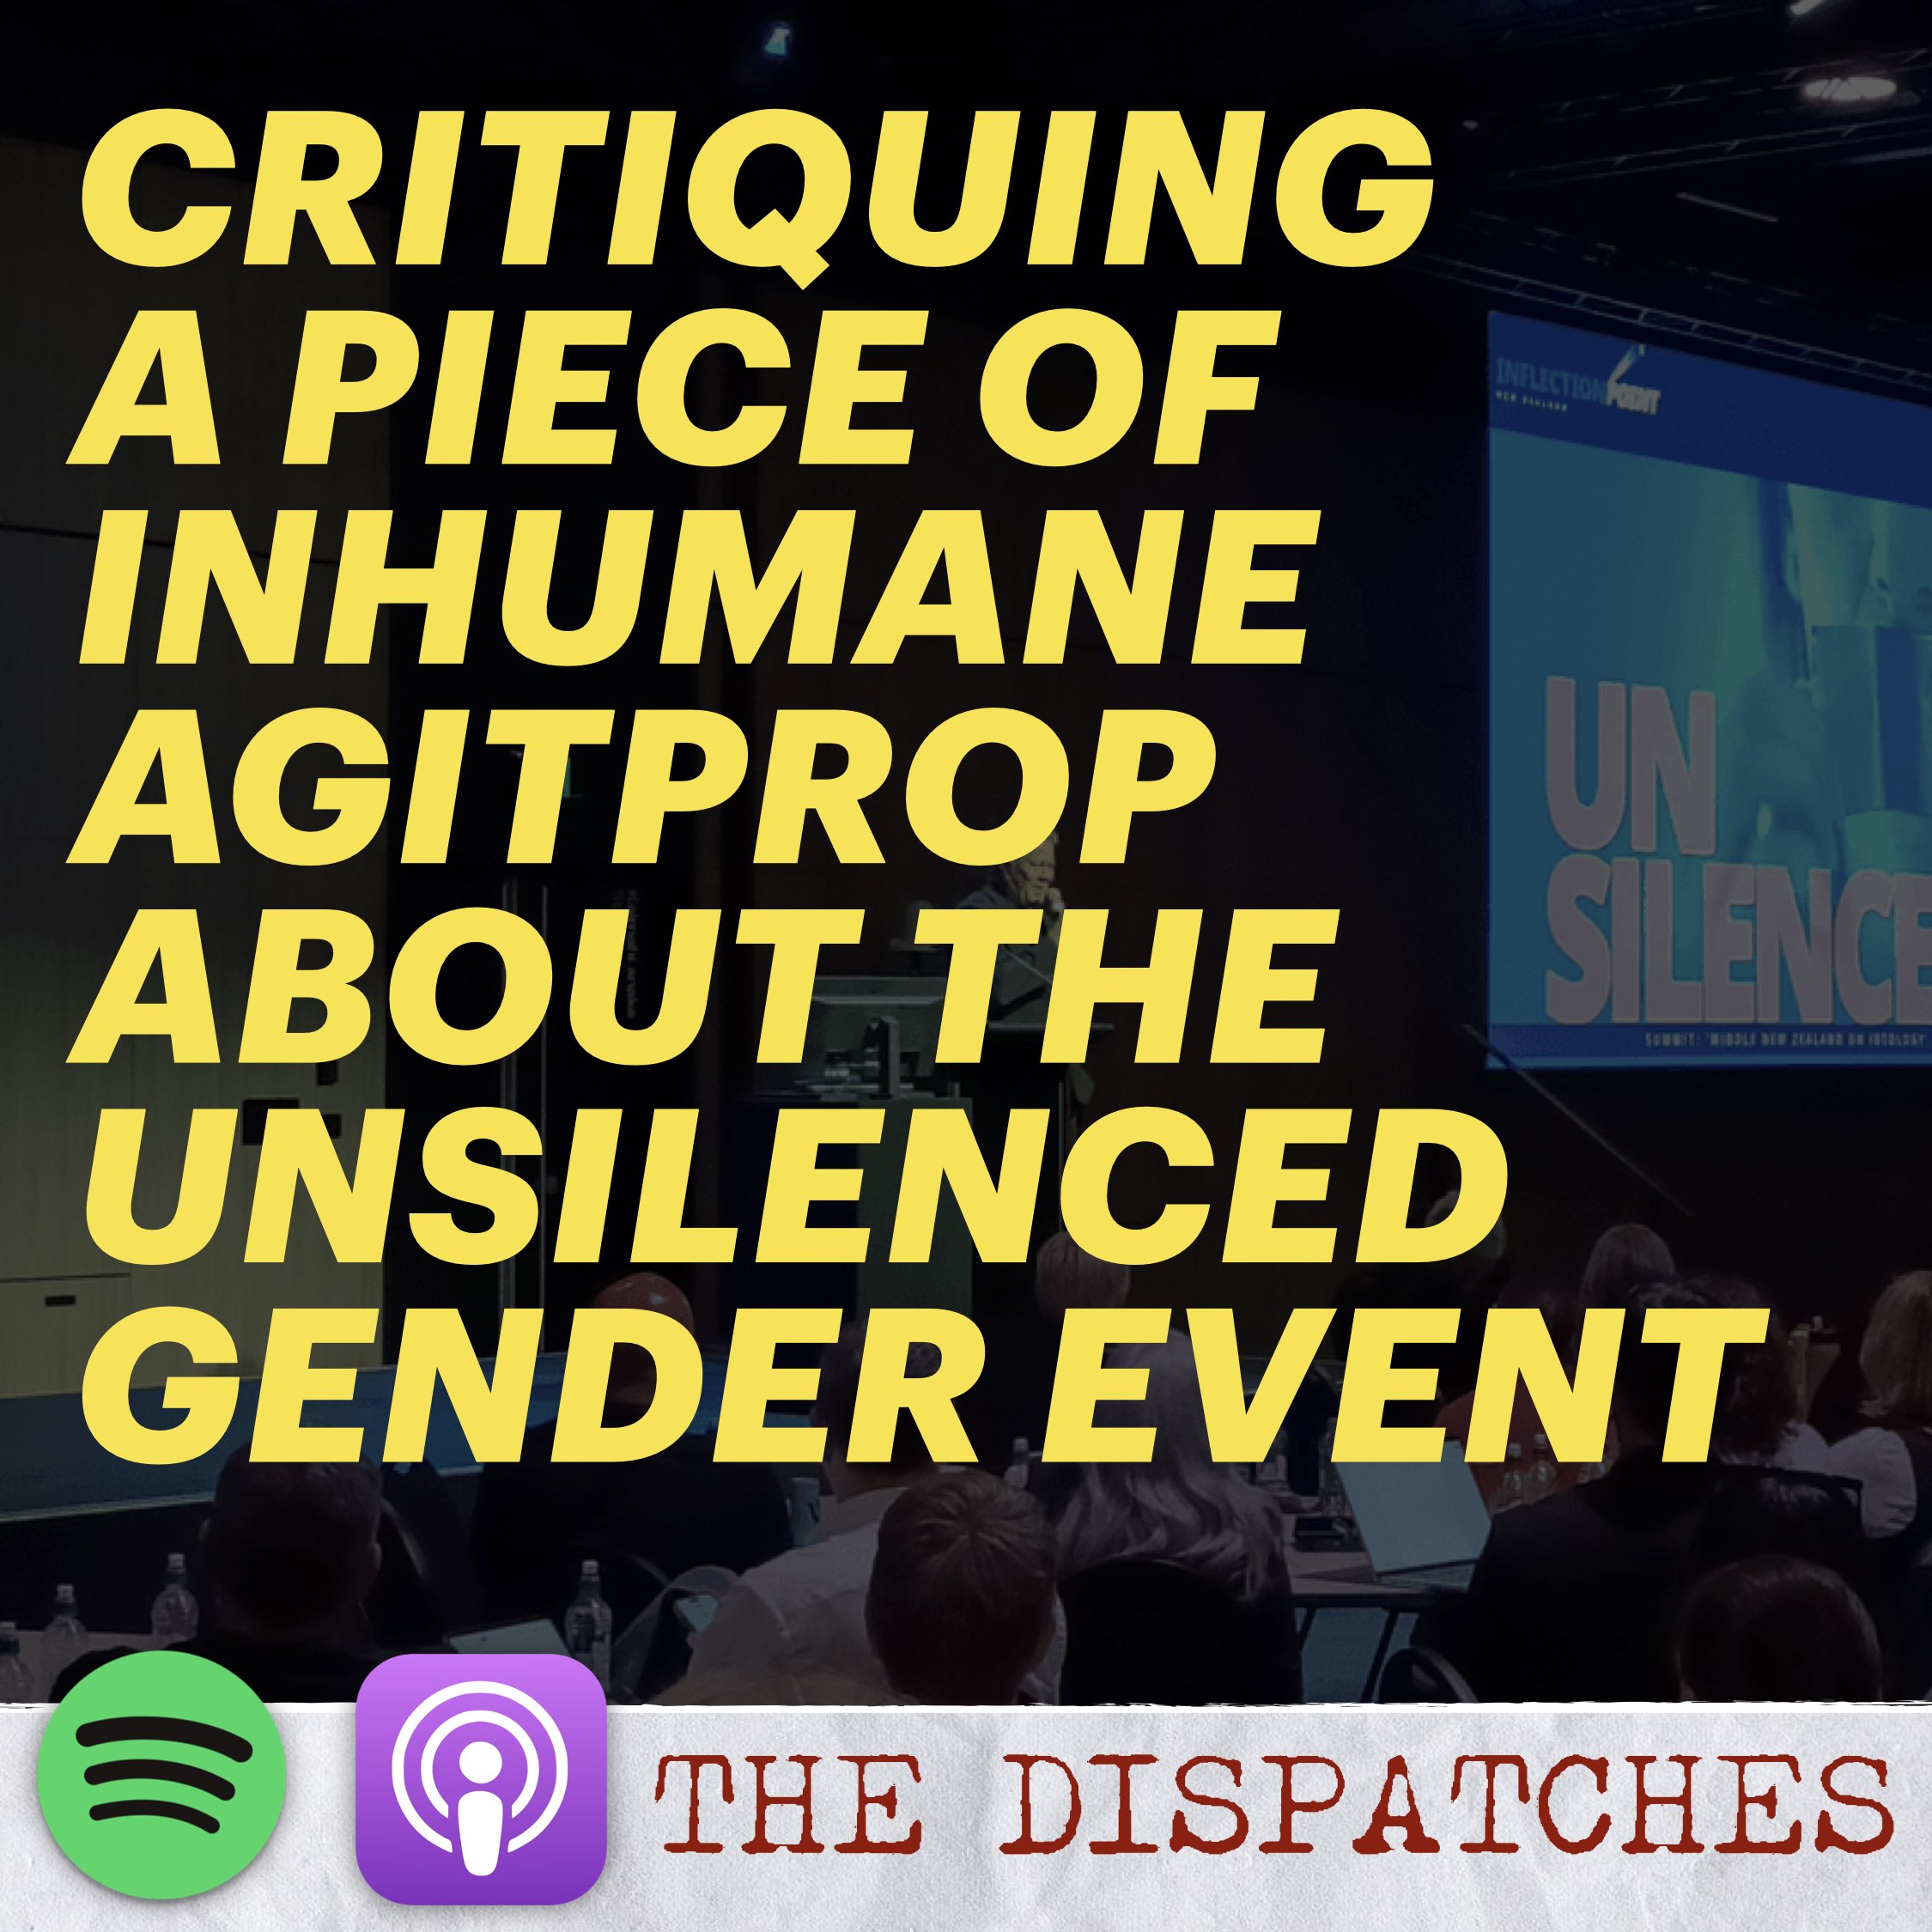 Critiquing a Piece of Inhumane Agitprop About the Unsilenced Gender Event